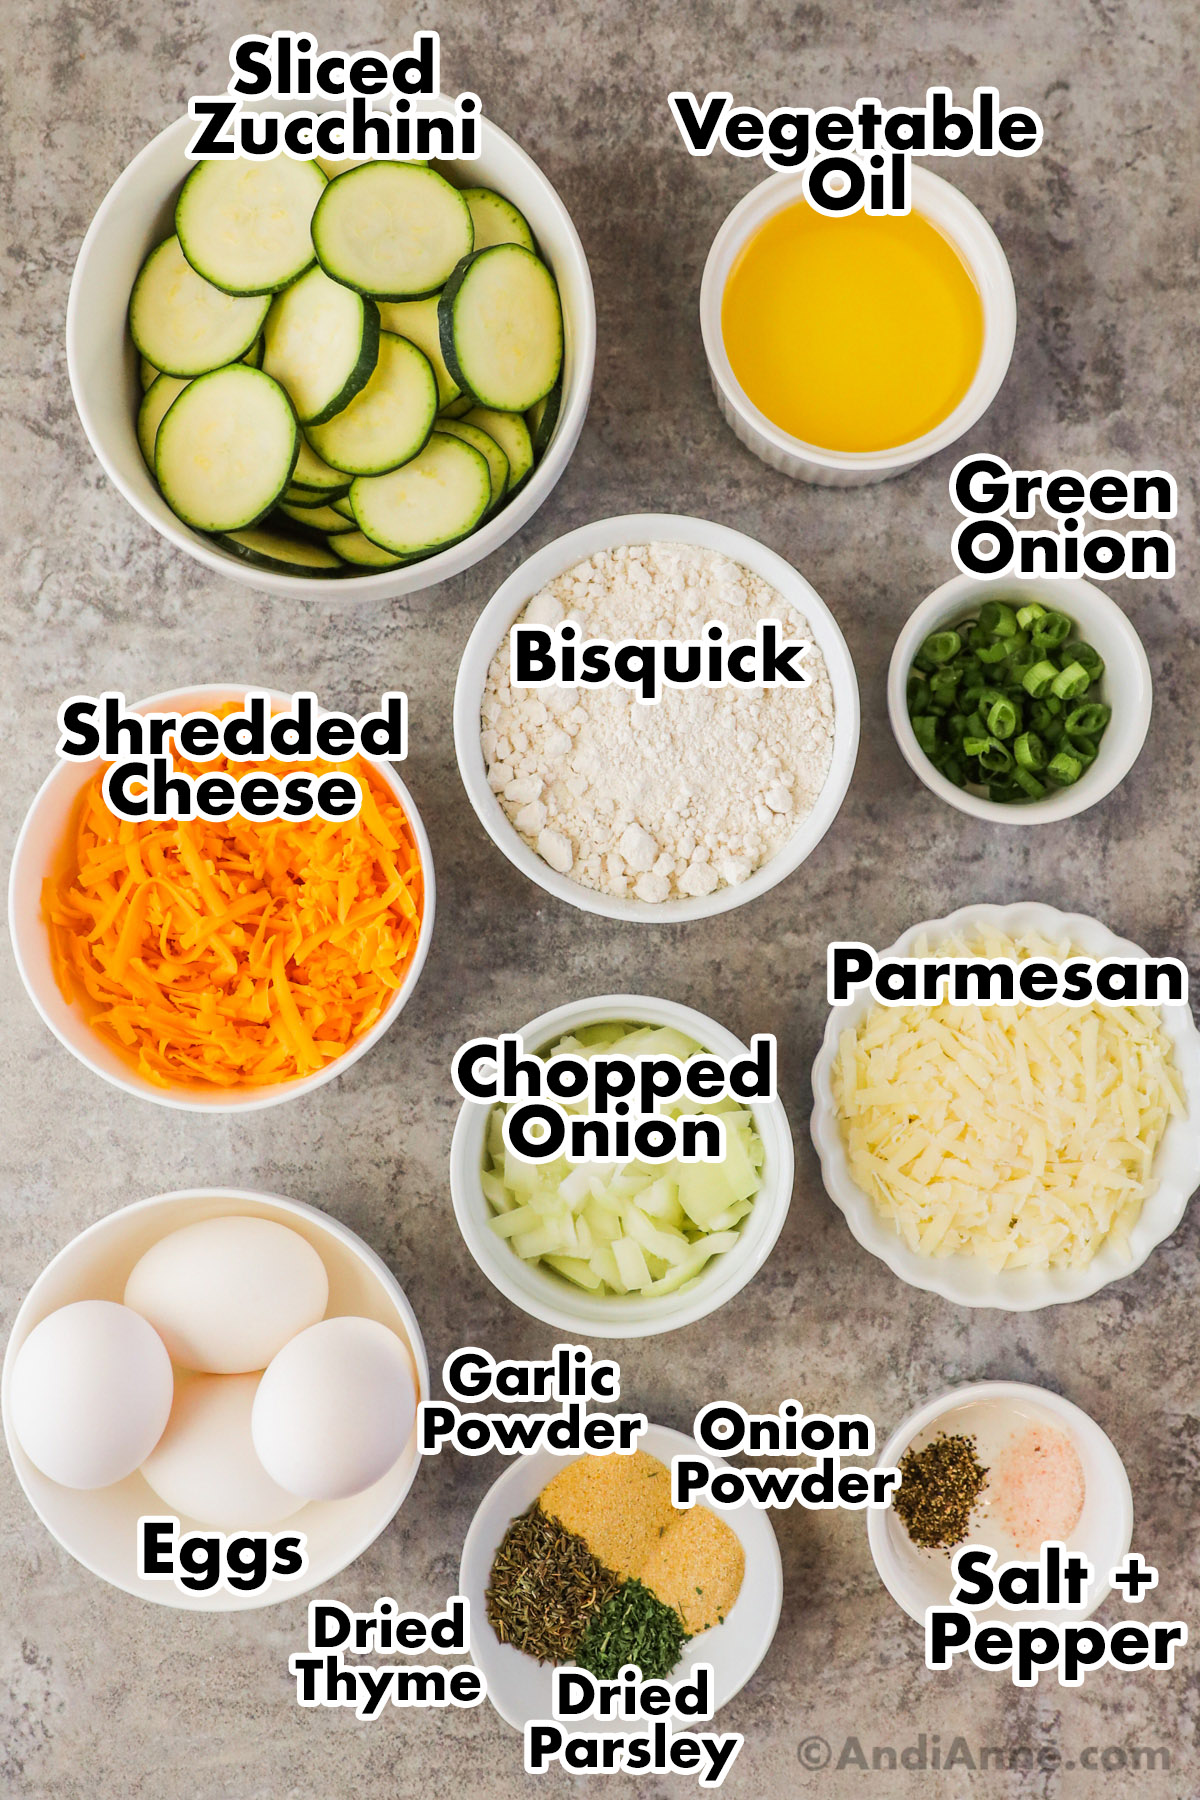 Recipe ingredients in bowls including sliced zucchini, vegetable oil, bisquick, green onion, shredded cheese, chopped onion, eggs, spices and grated parmesan.